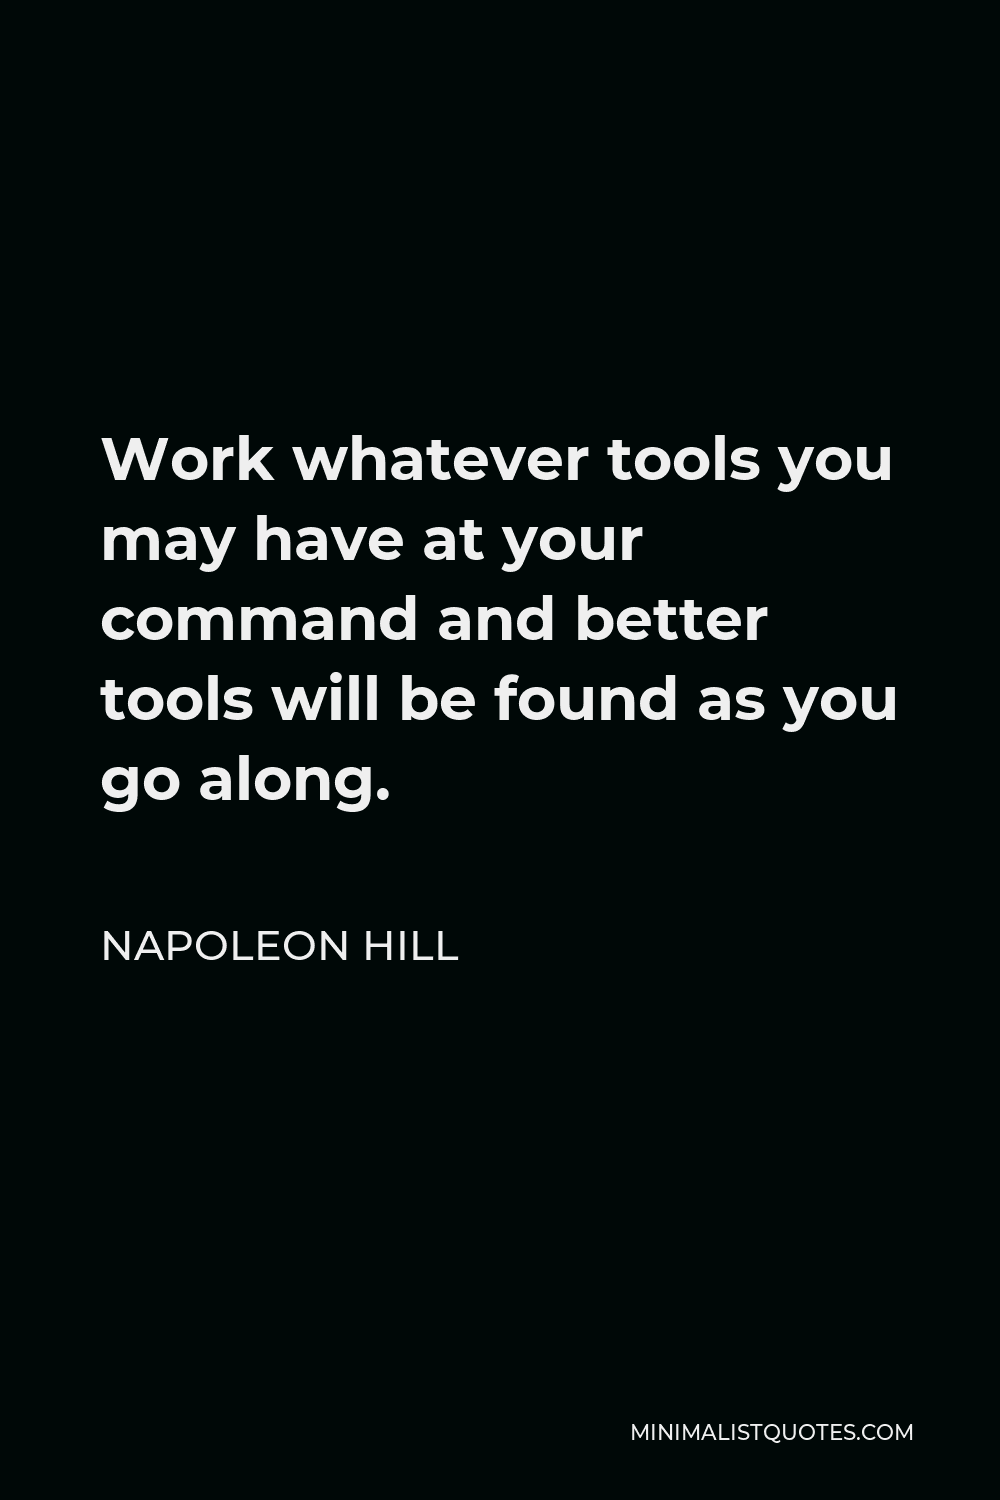 Napoleon Hill Quote - Work whatever tools you may have at your command and better tools will be found as you go along.